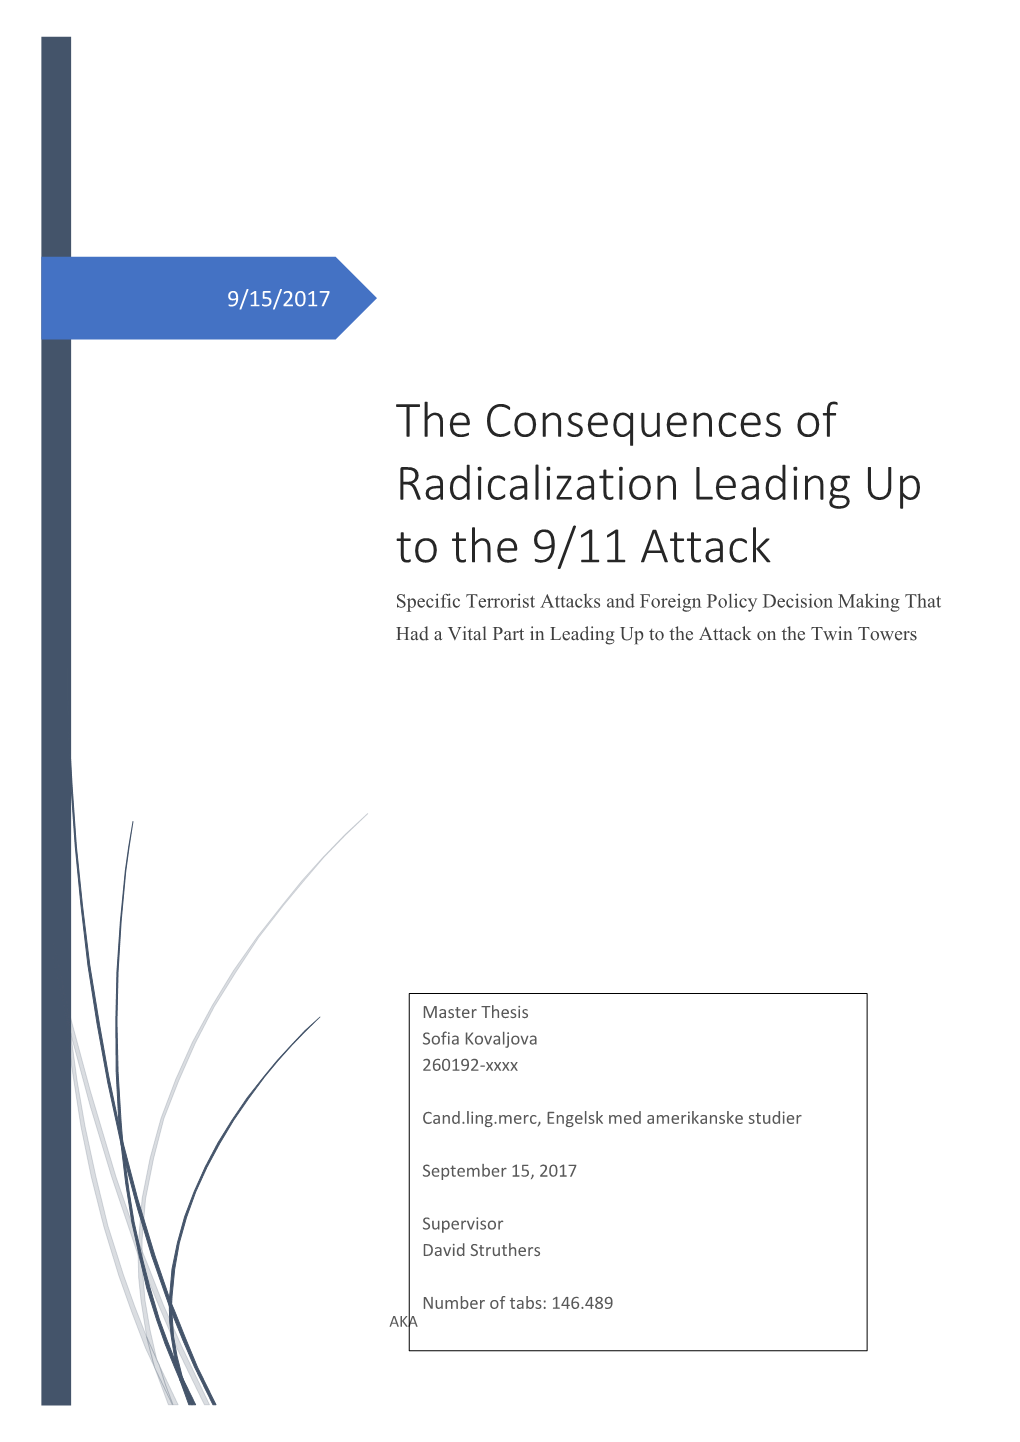 The Consequences of Radicalization Leading up to the 9/11 Attack